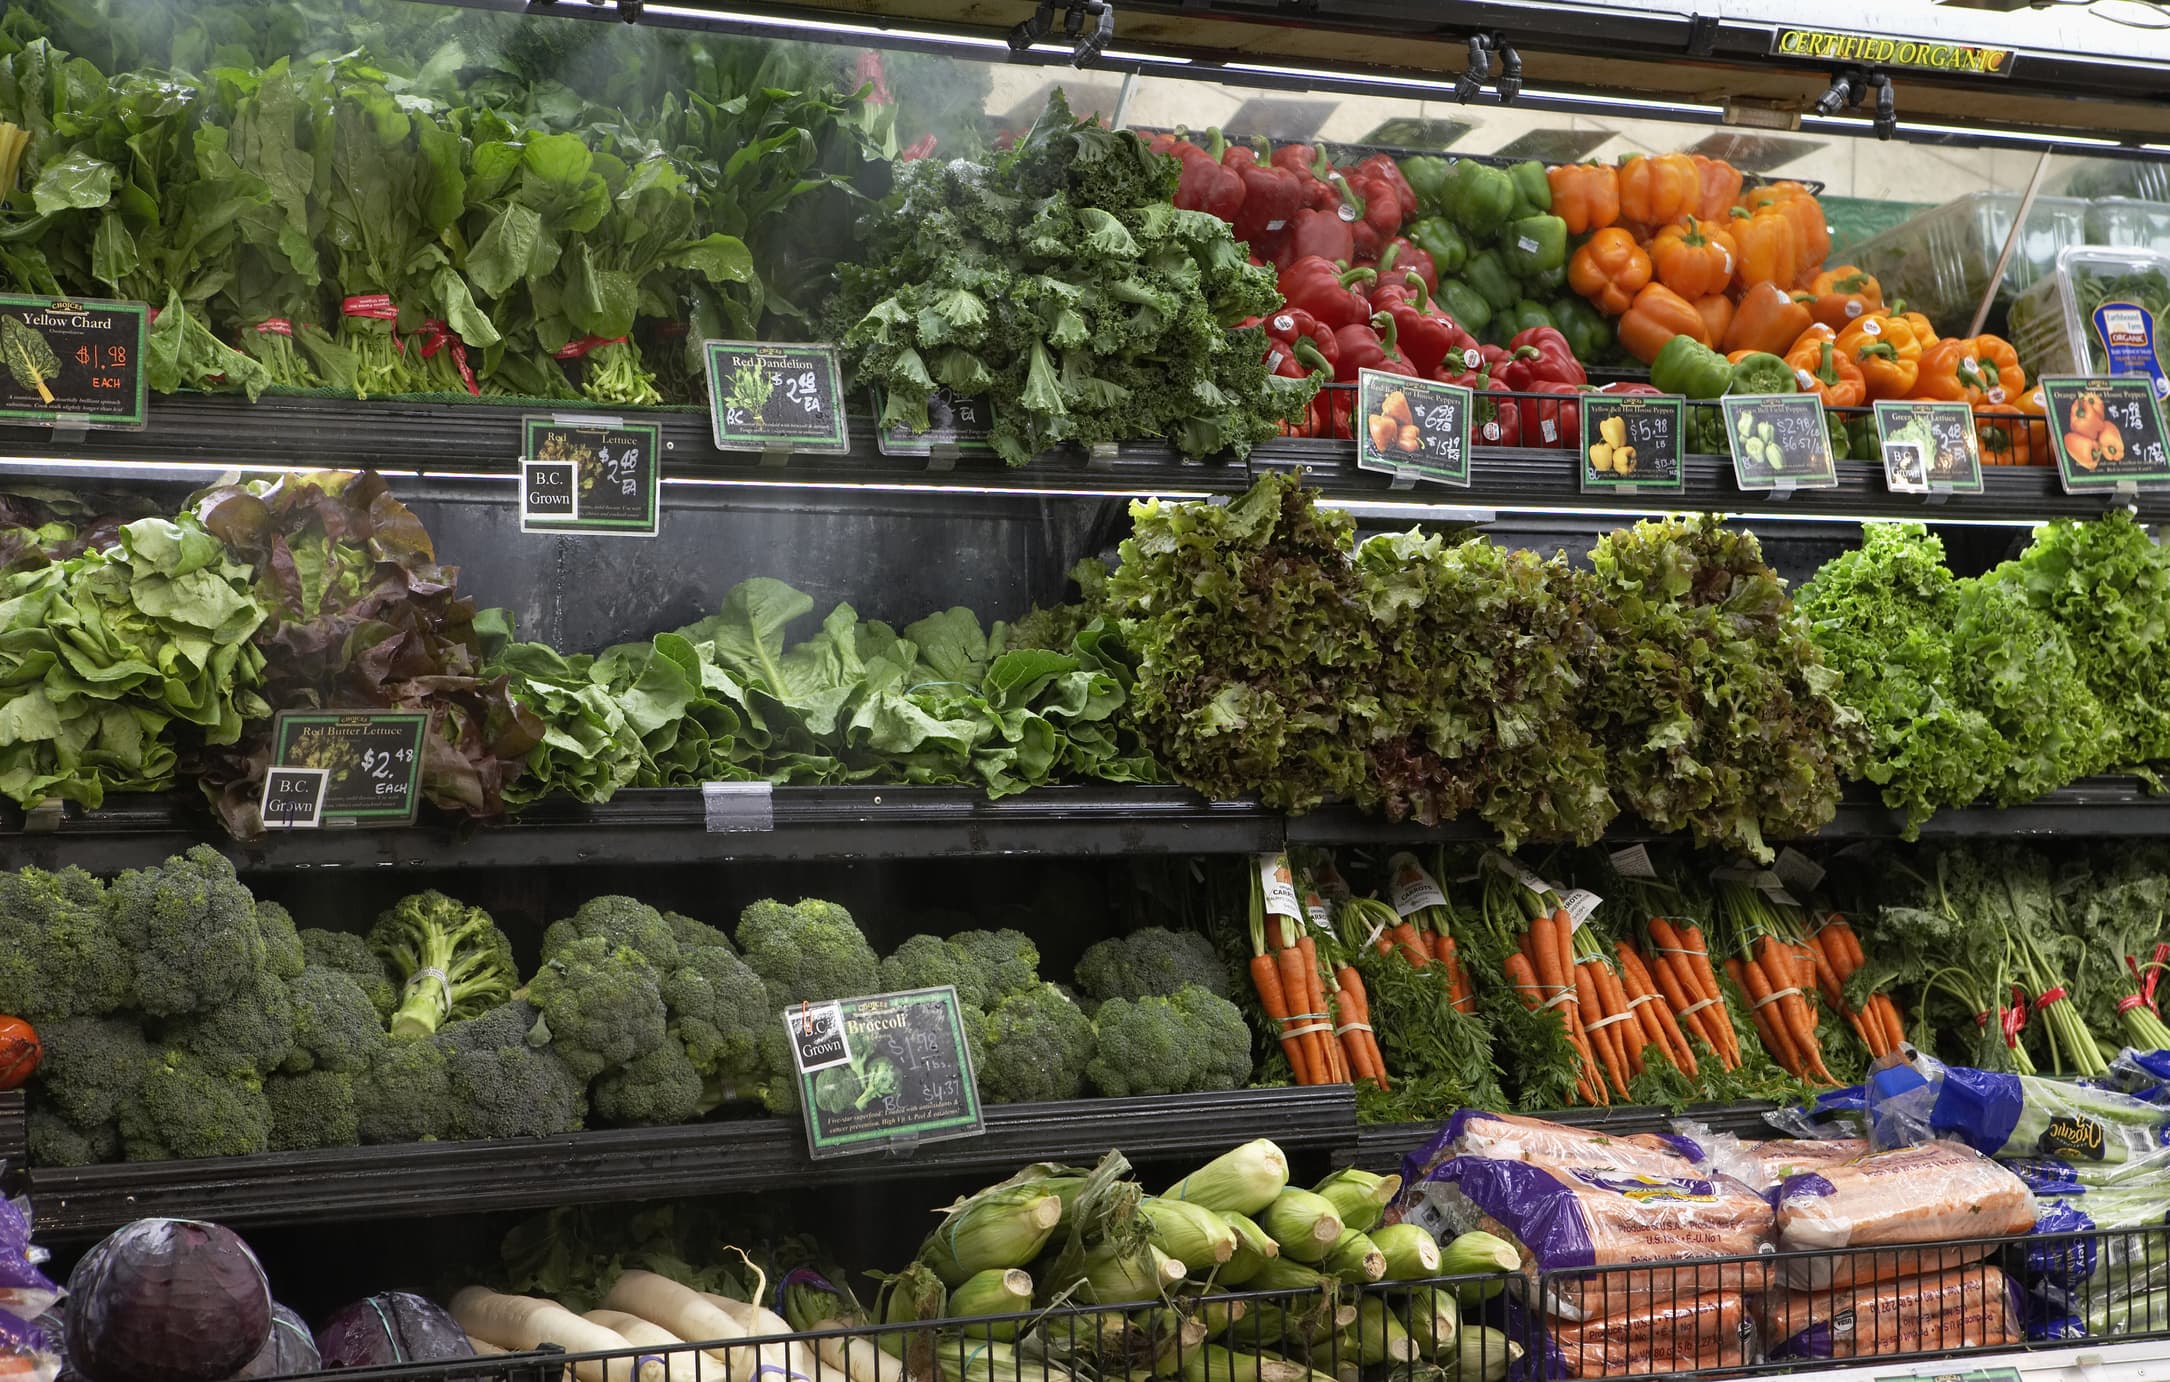 Make the most of the produce aisle